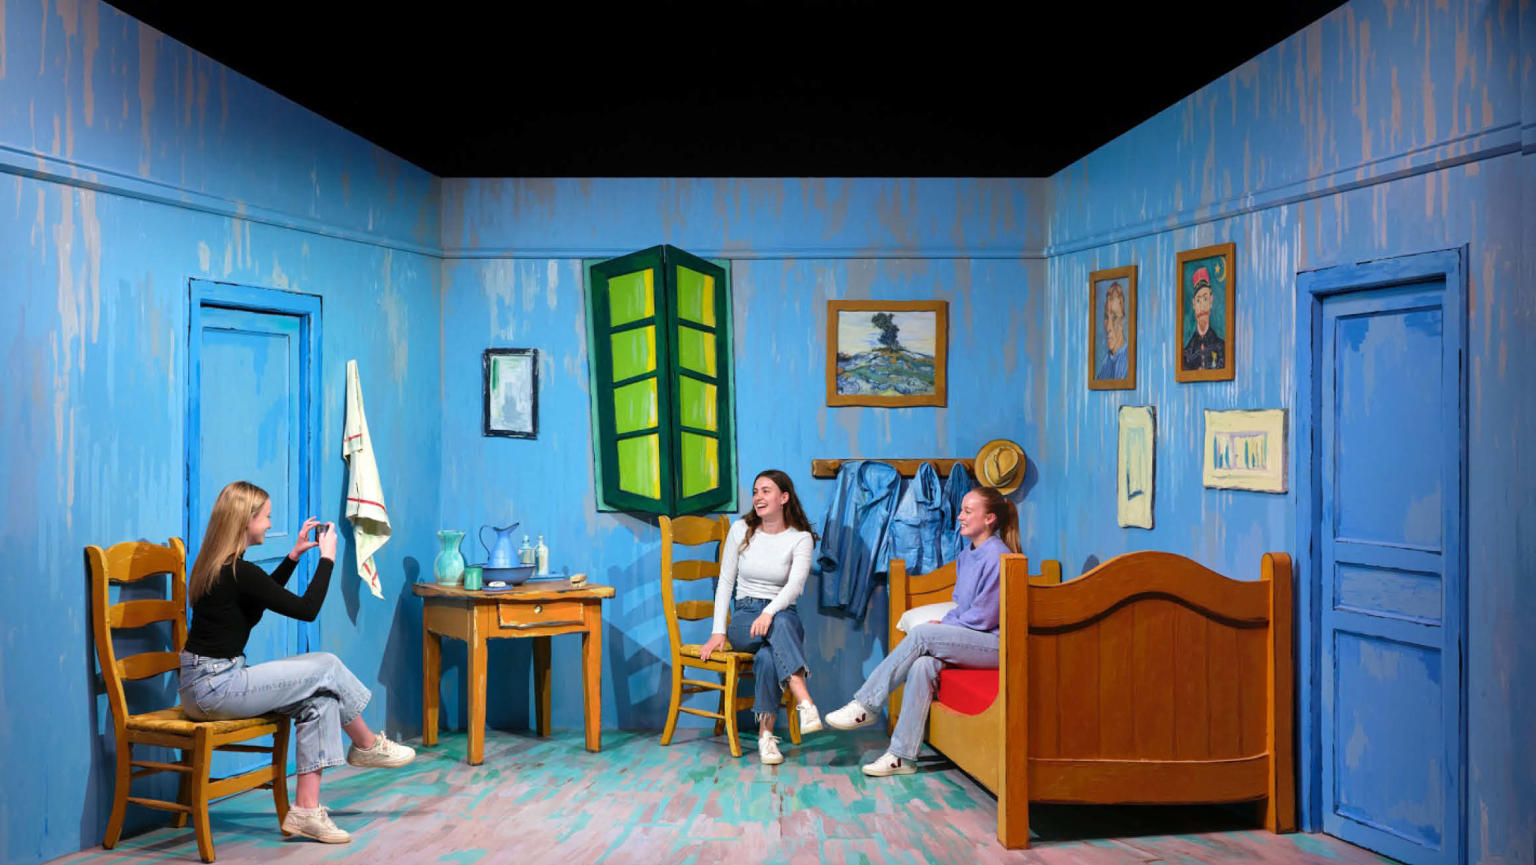 An image showing three women sitting in an animated cartoon room with one of the women taking an image on her phone of the other two. 